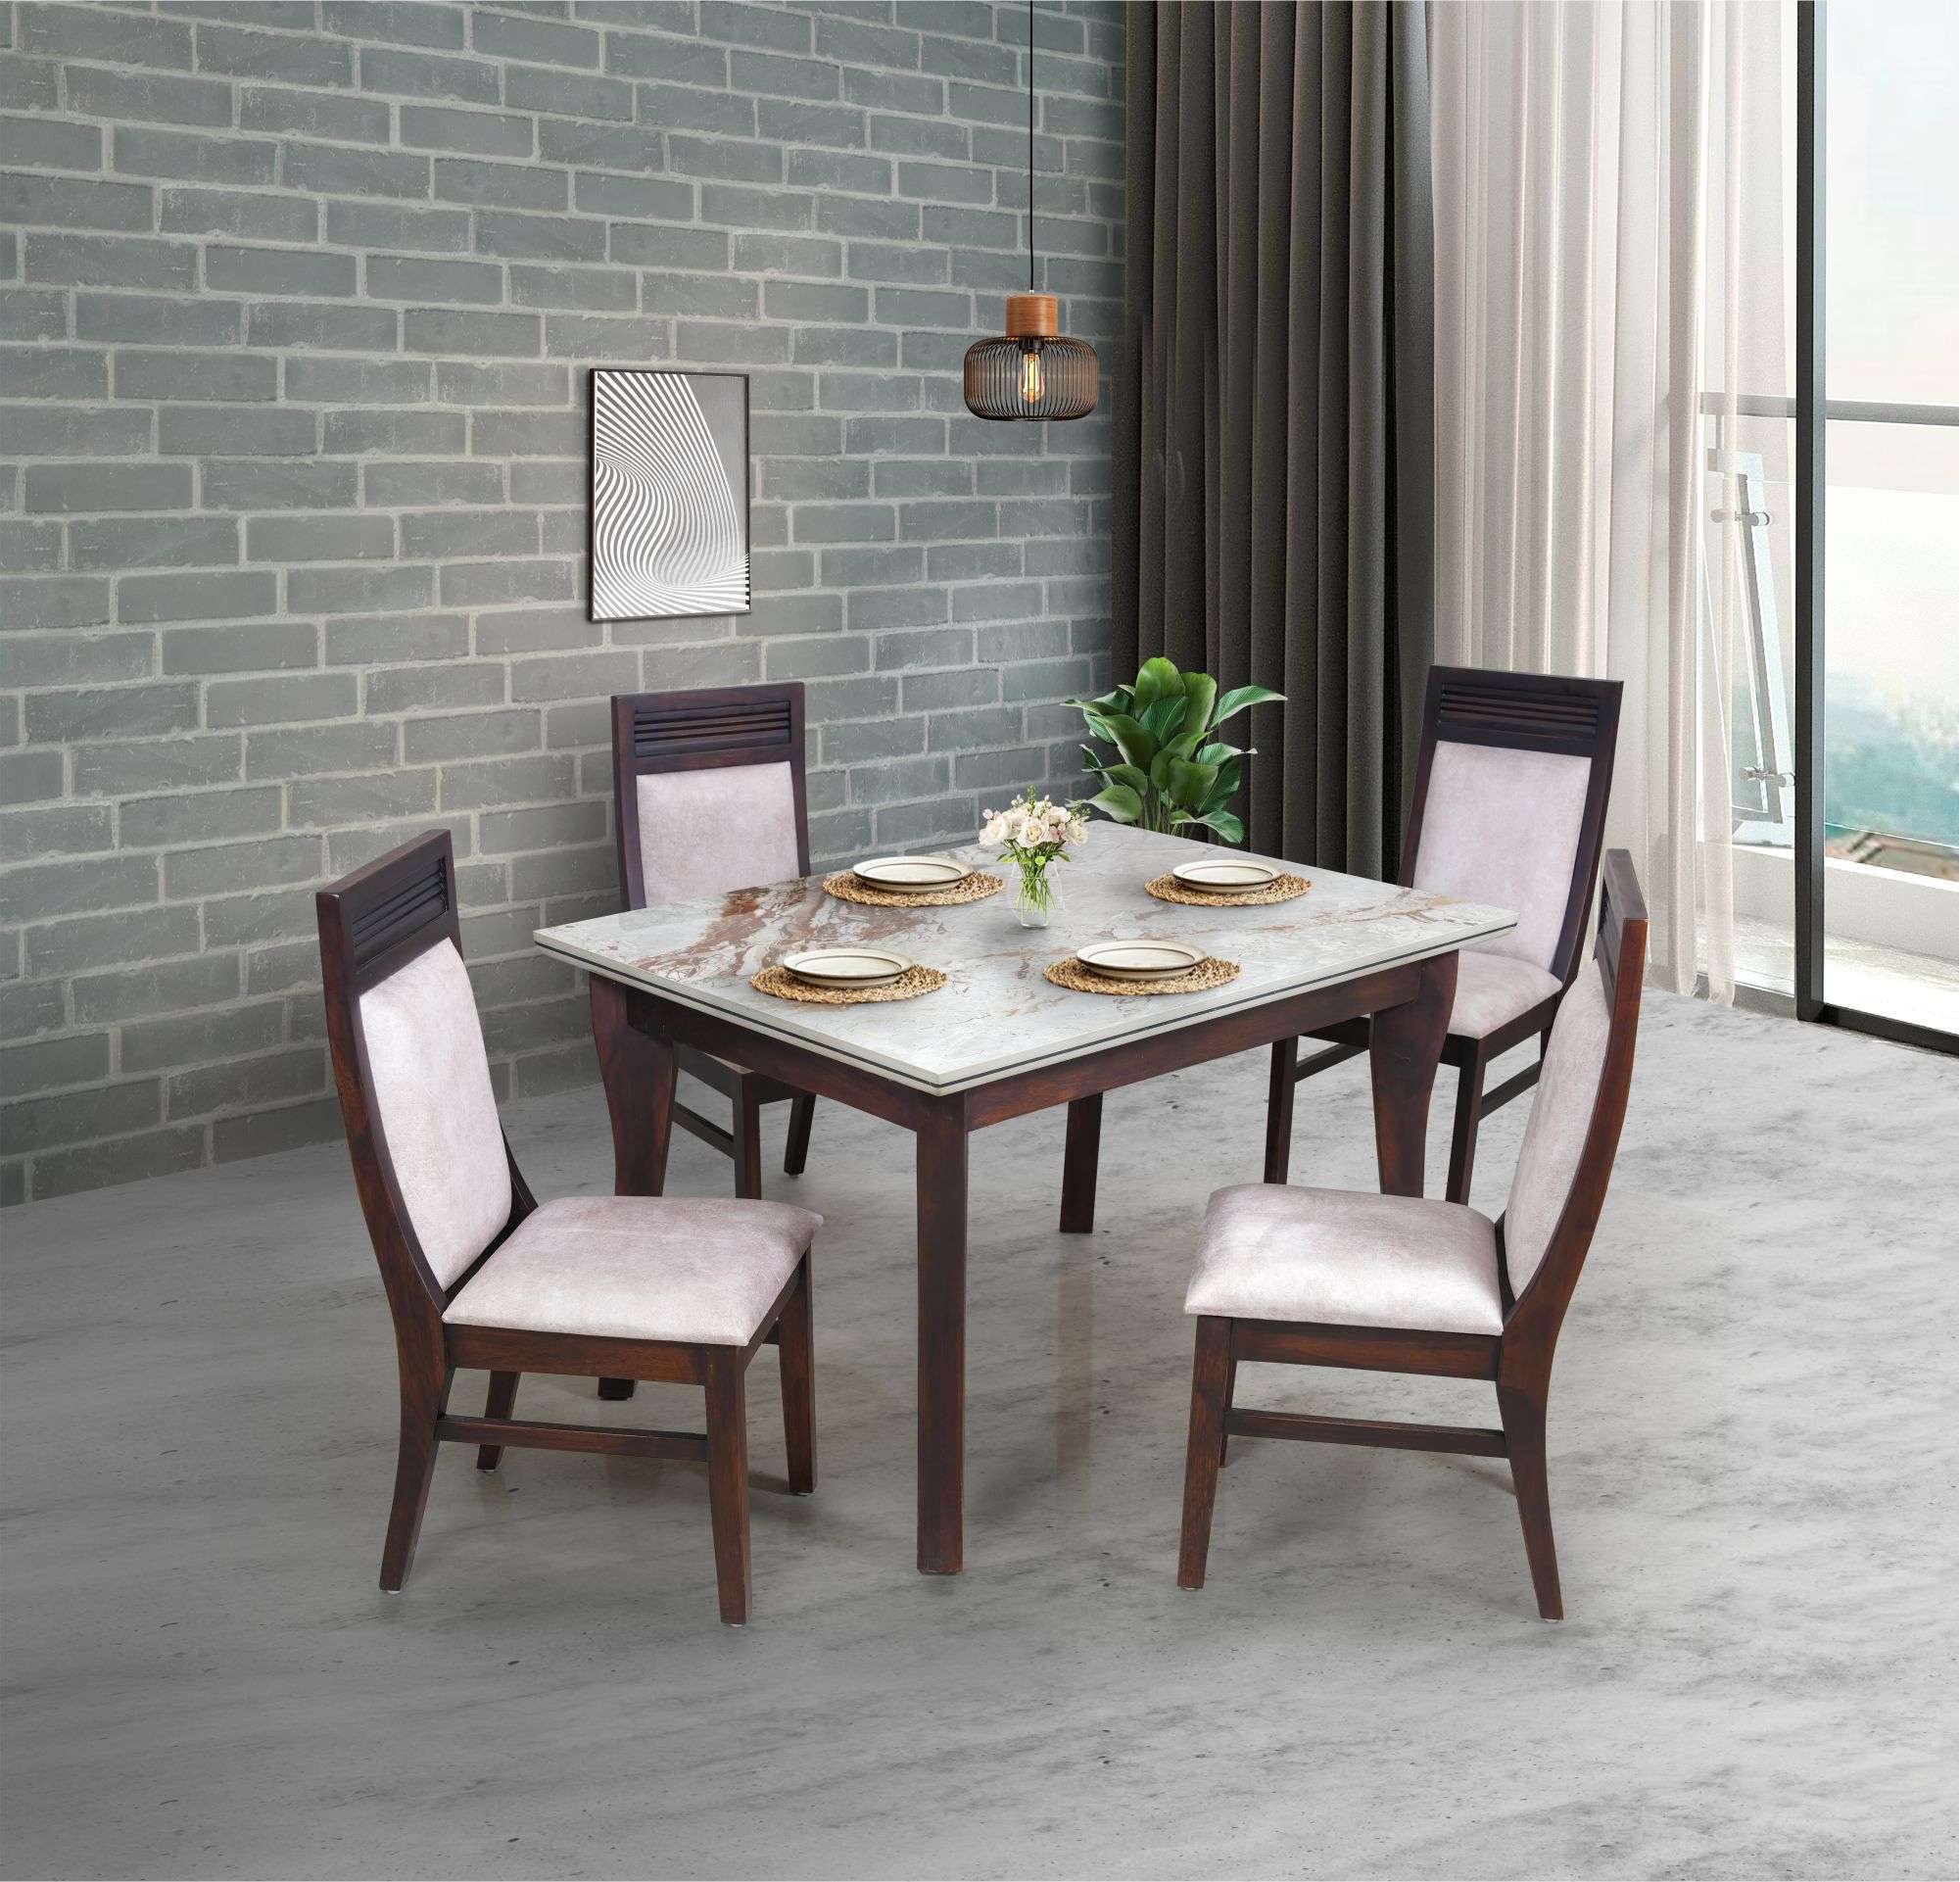 Stonic 4 Seater Dining Table Set